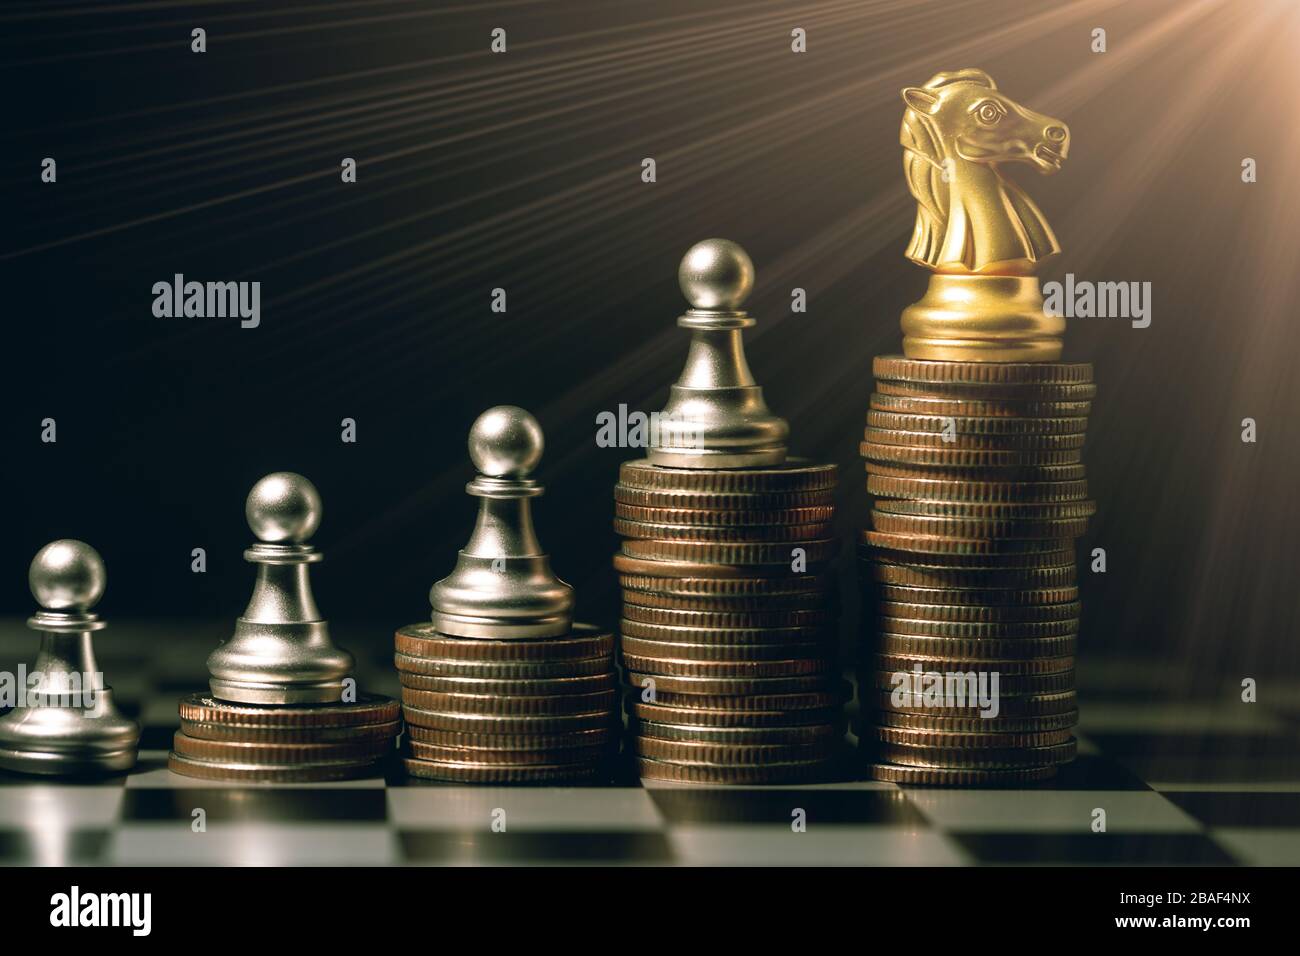 Gold Chess. Elite Business Team Leader golden color feeling luxury rich gorgeous image. Stock Photo